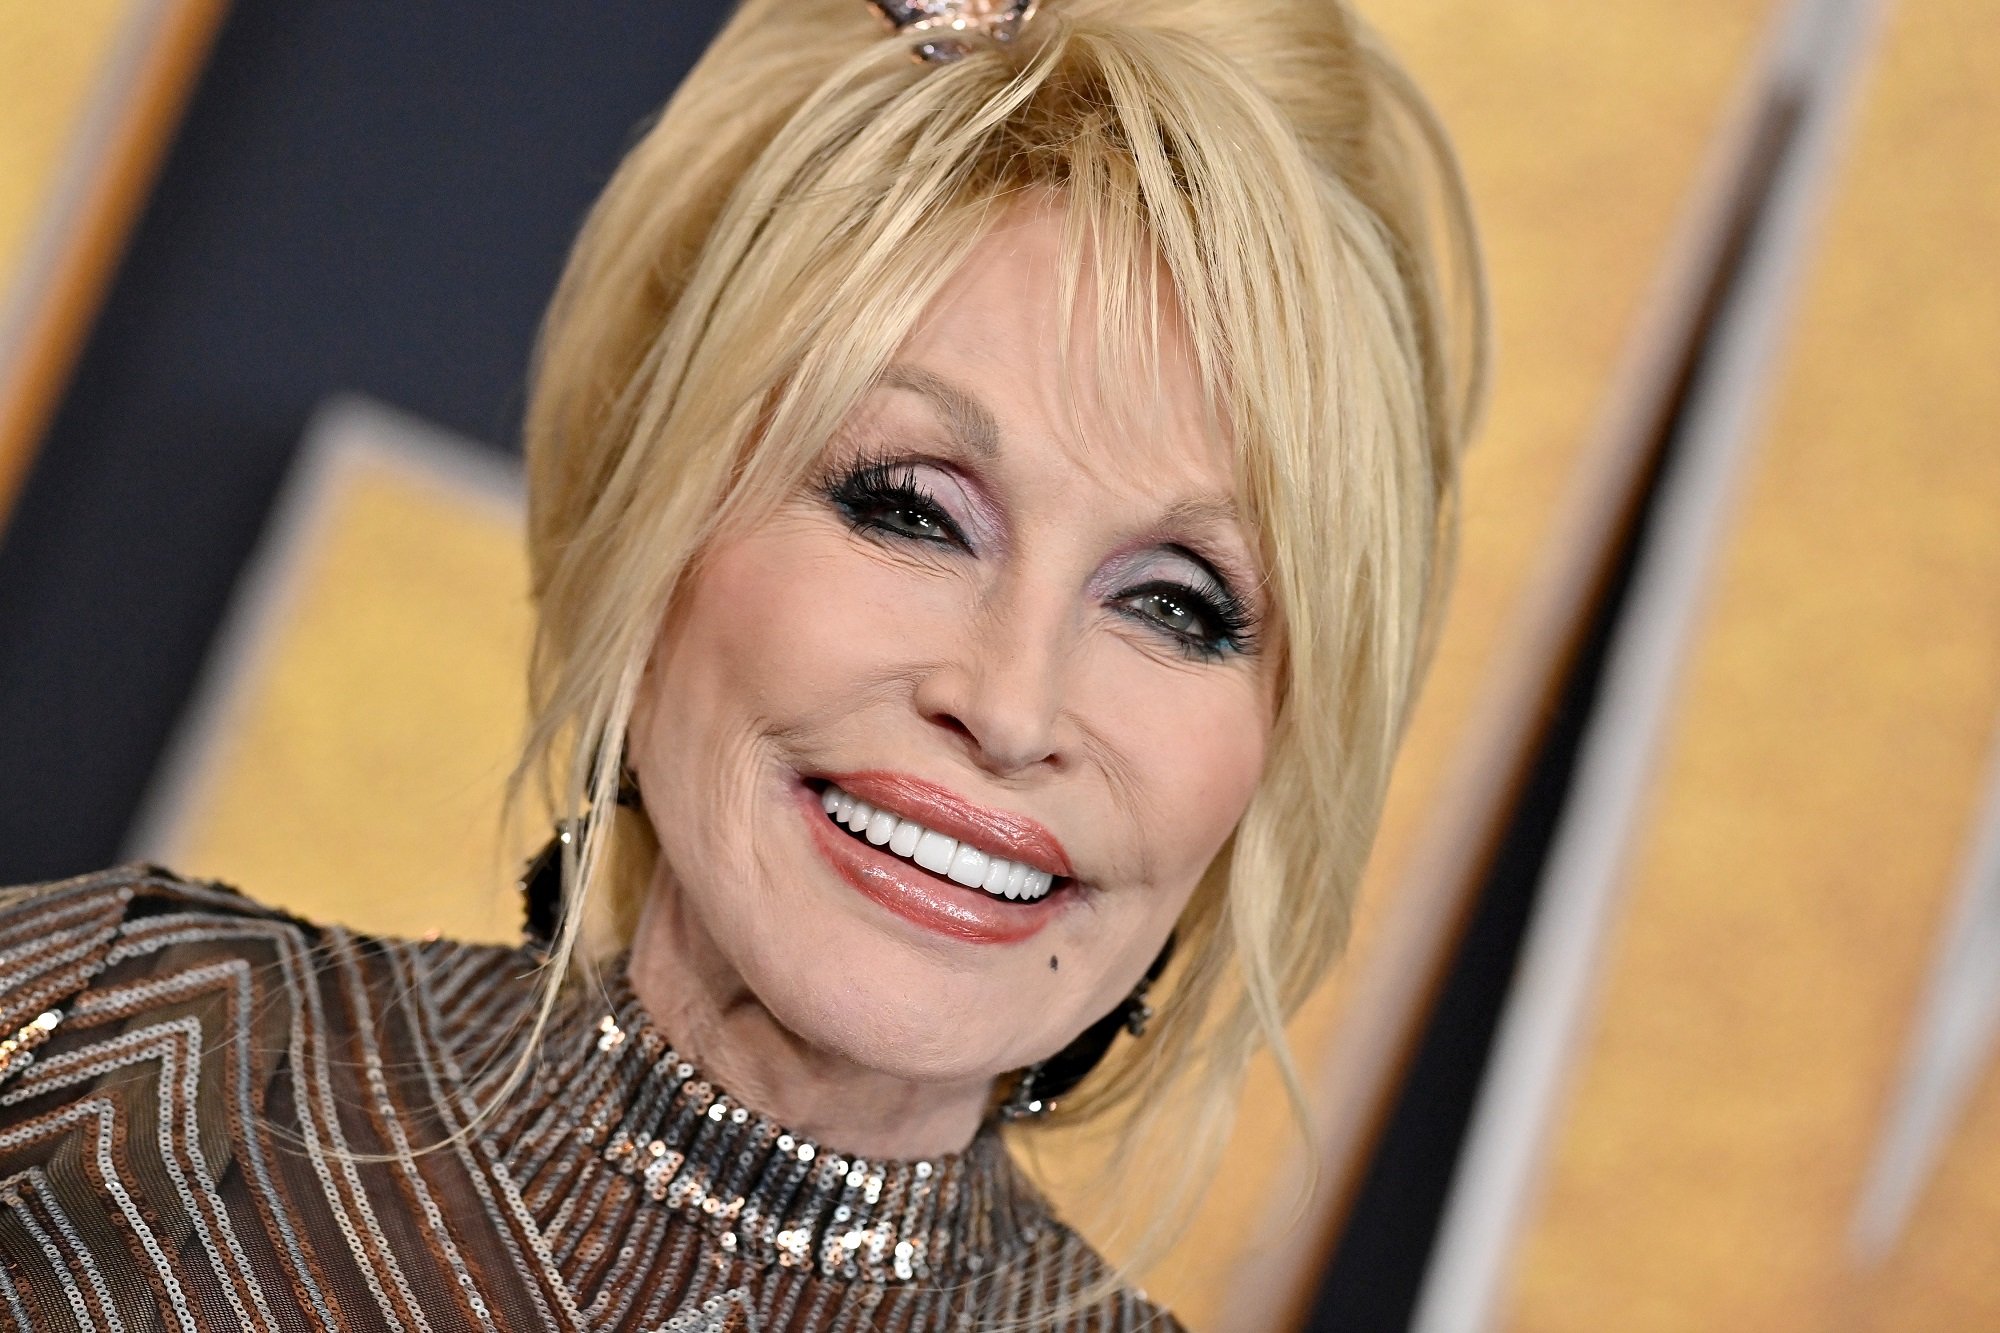 Dolly Parton smiles in front of a gold backdrop